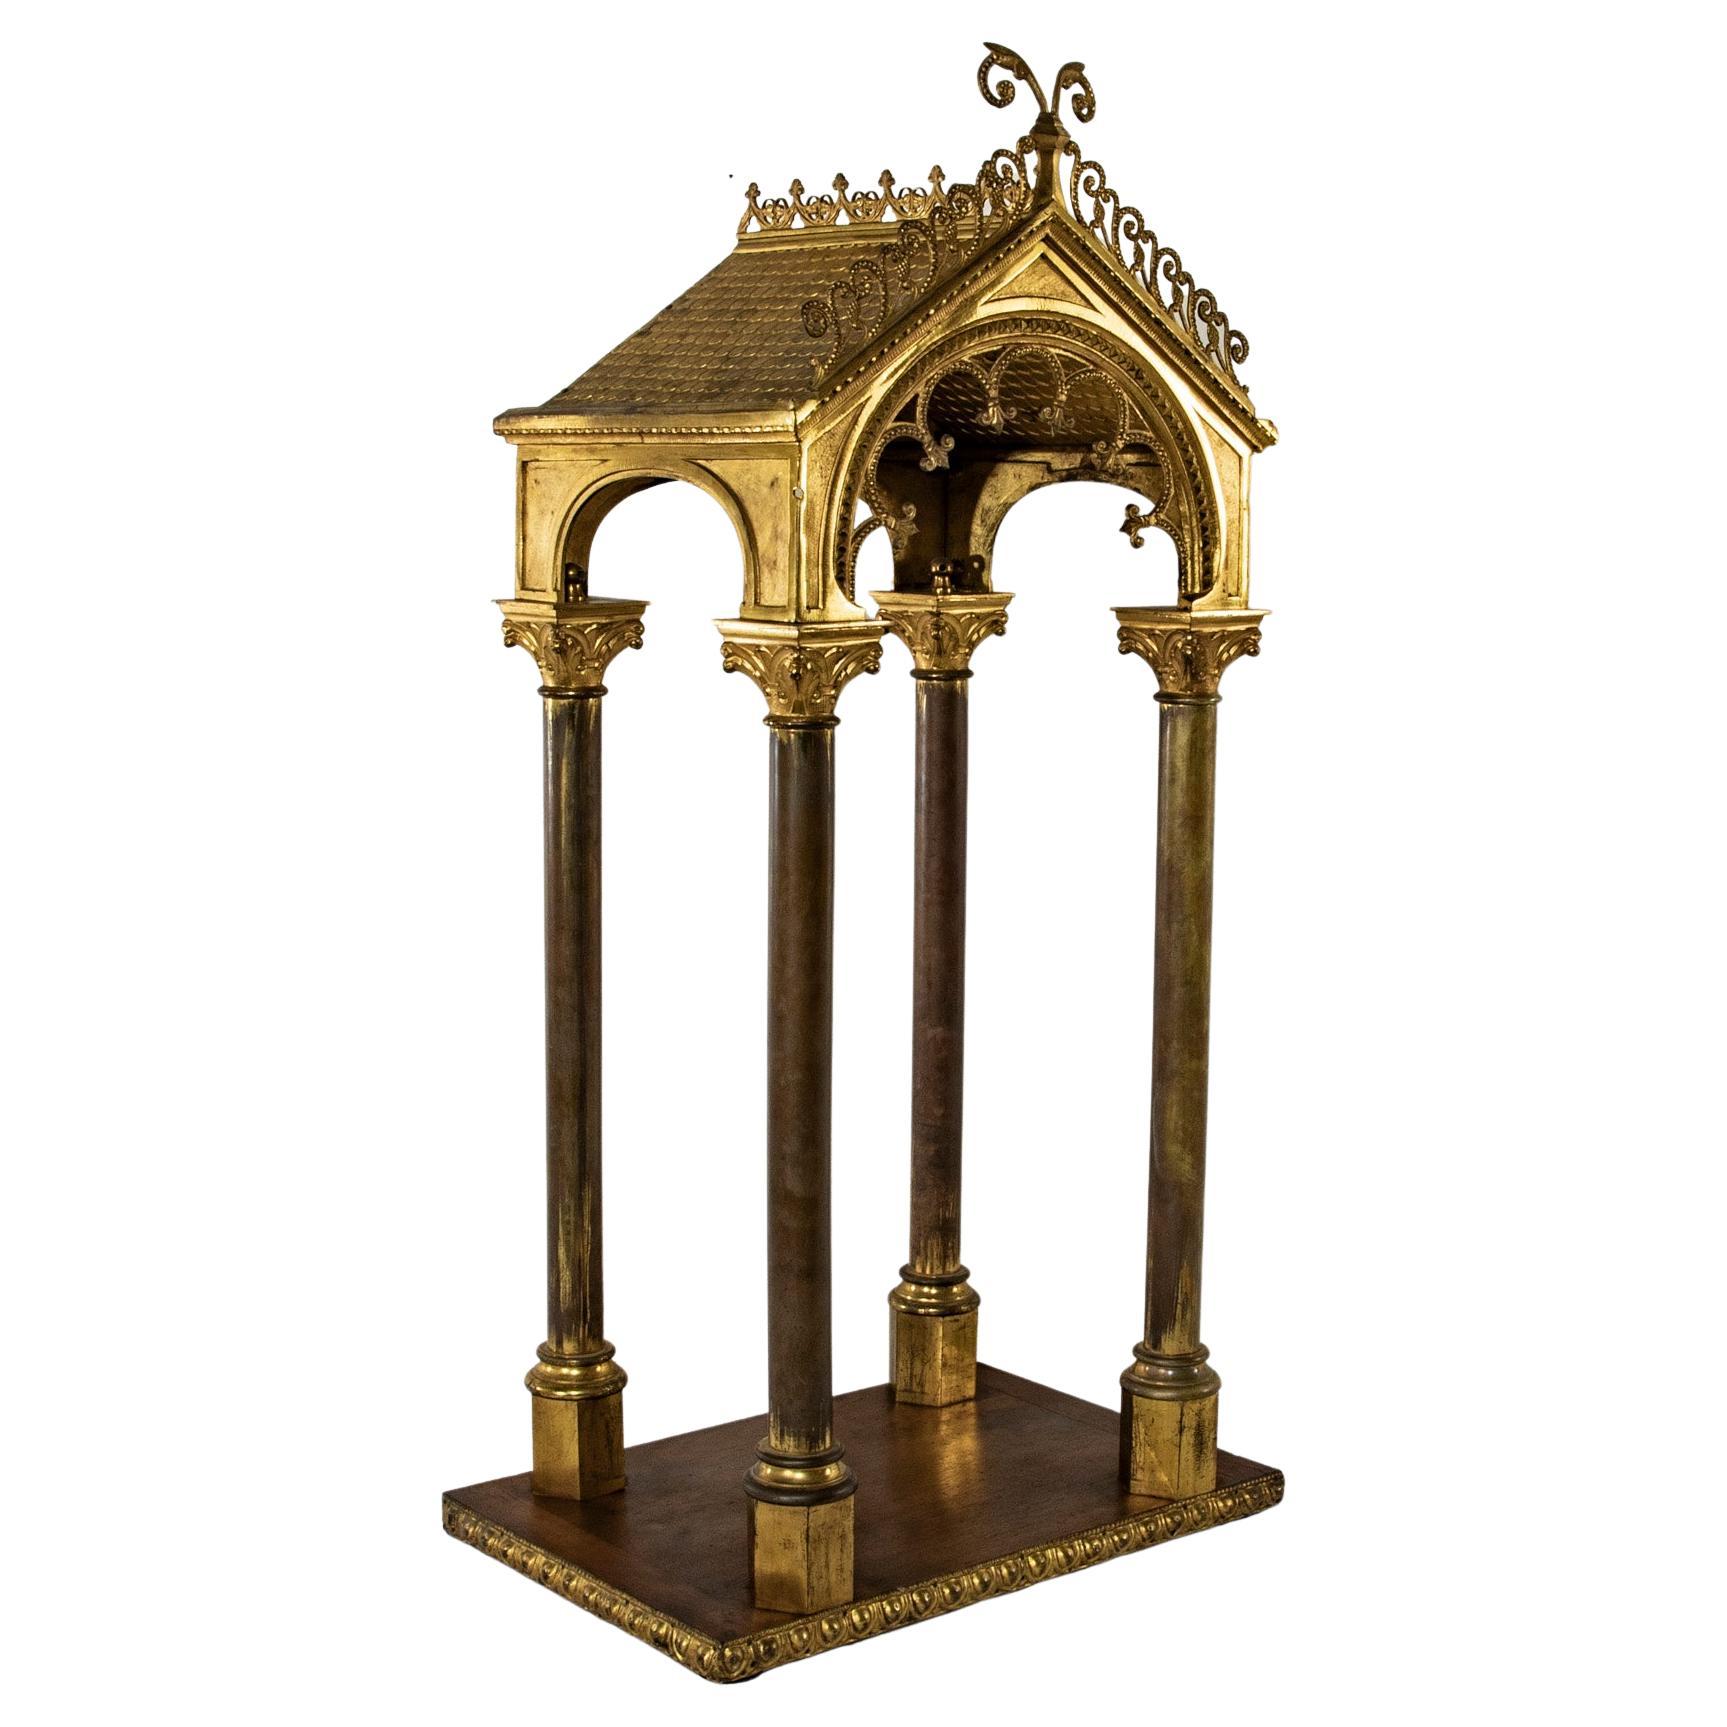 Early 20th Century Italian Gilt Brass and Wooden Altar or Sculpture Stand